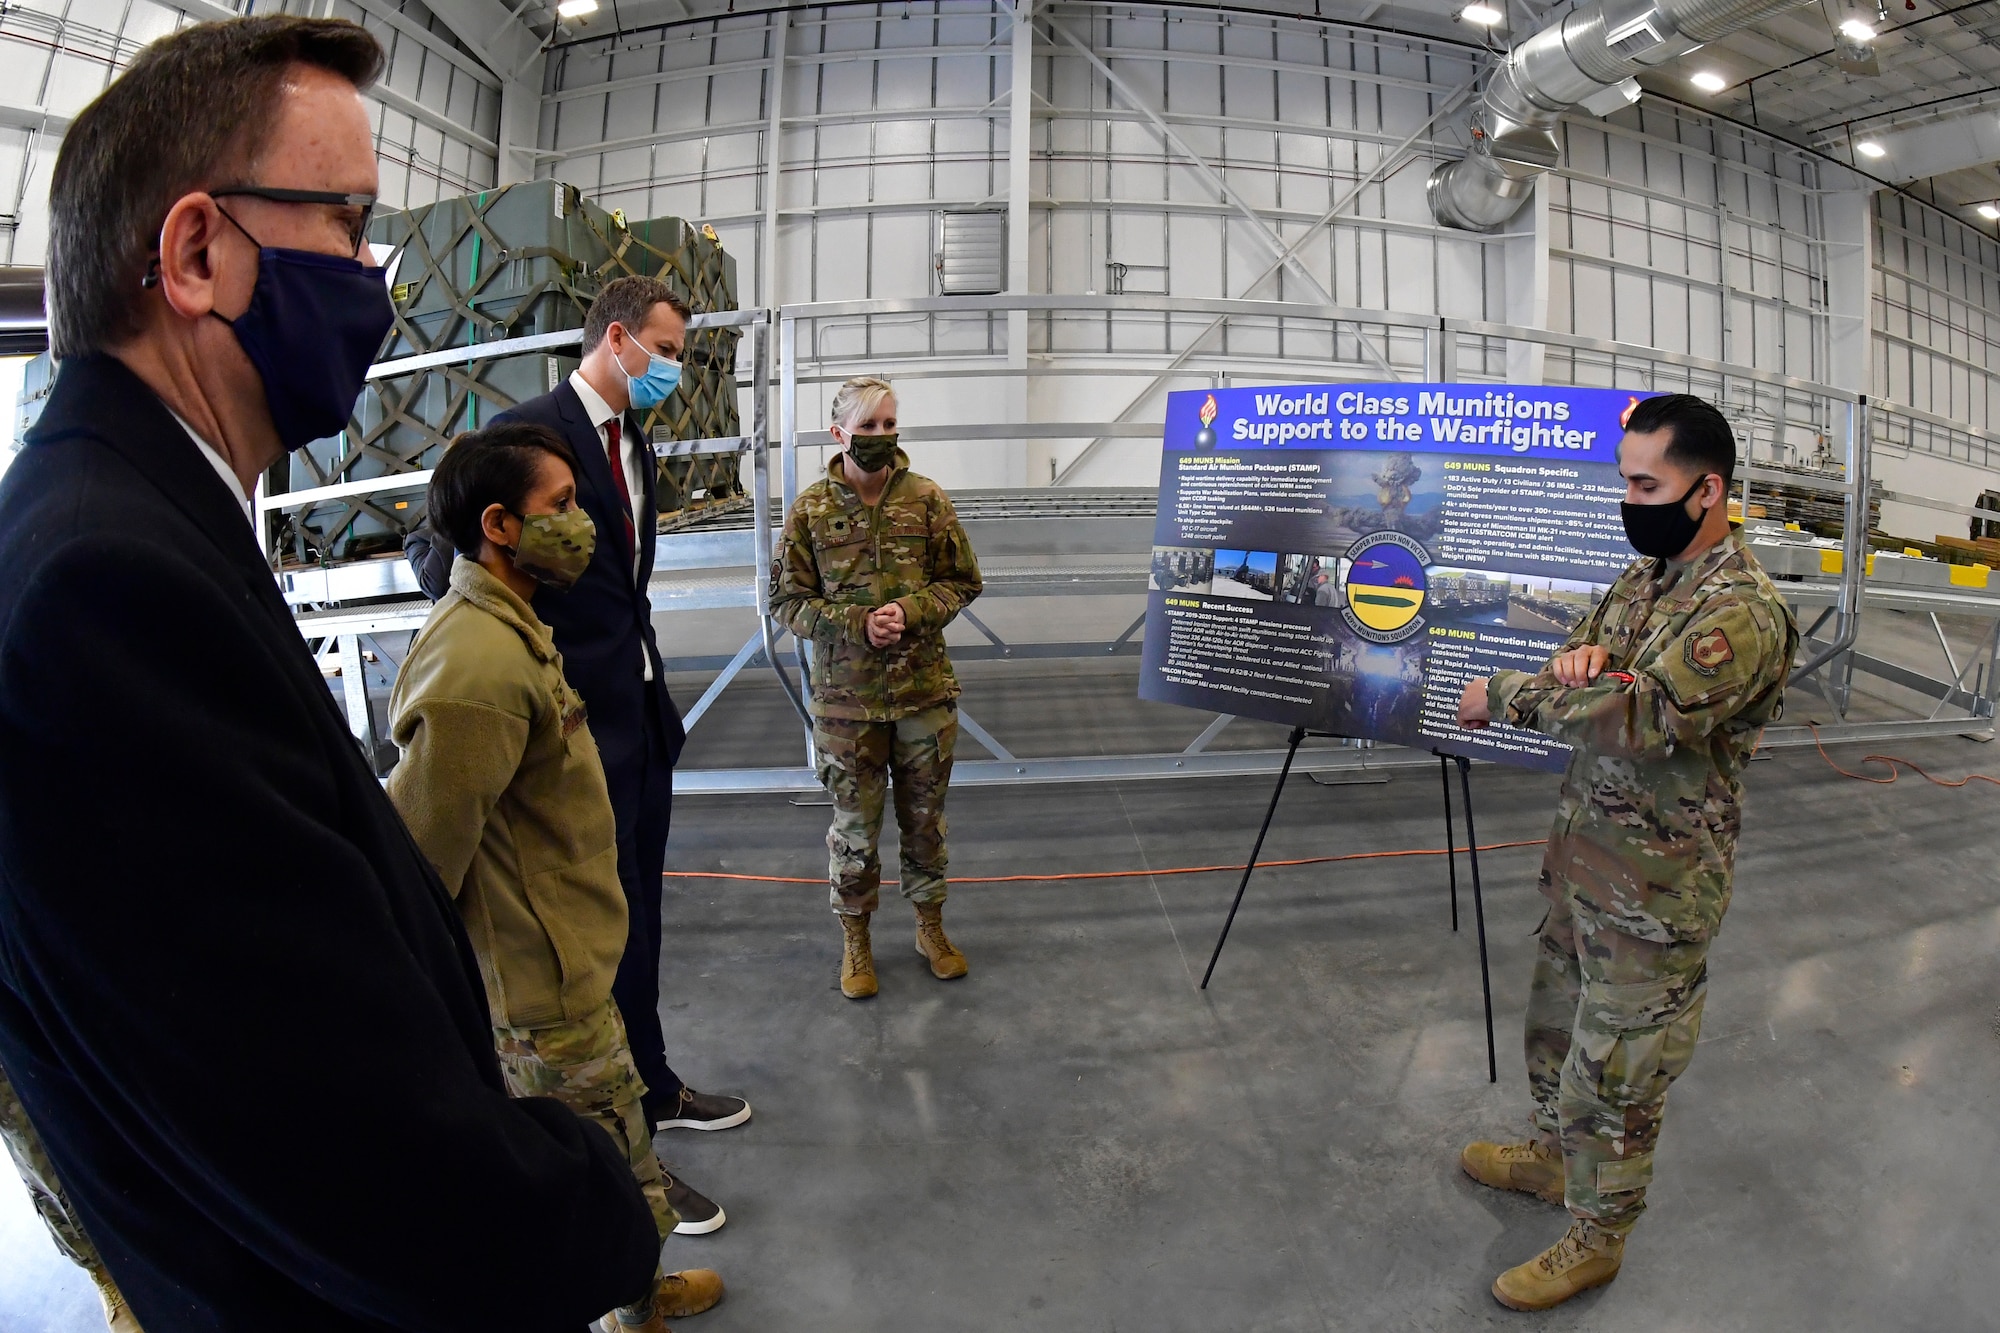 (Left to right) Peter Jenks, district director for Utah Rep. Blake Moore, Col. Jenise Carroll, 75th Air Base Wing commander, Moore, and Lt. Col. Naomi Franchetti, 649th Munitions Squadron commander, listen to Senior Airman Armando Pena, 649th MUNS, during a visit to the squadron at Hill Air Force Base, Utah, Feb. 16, 2021.